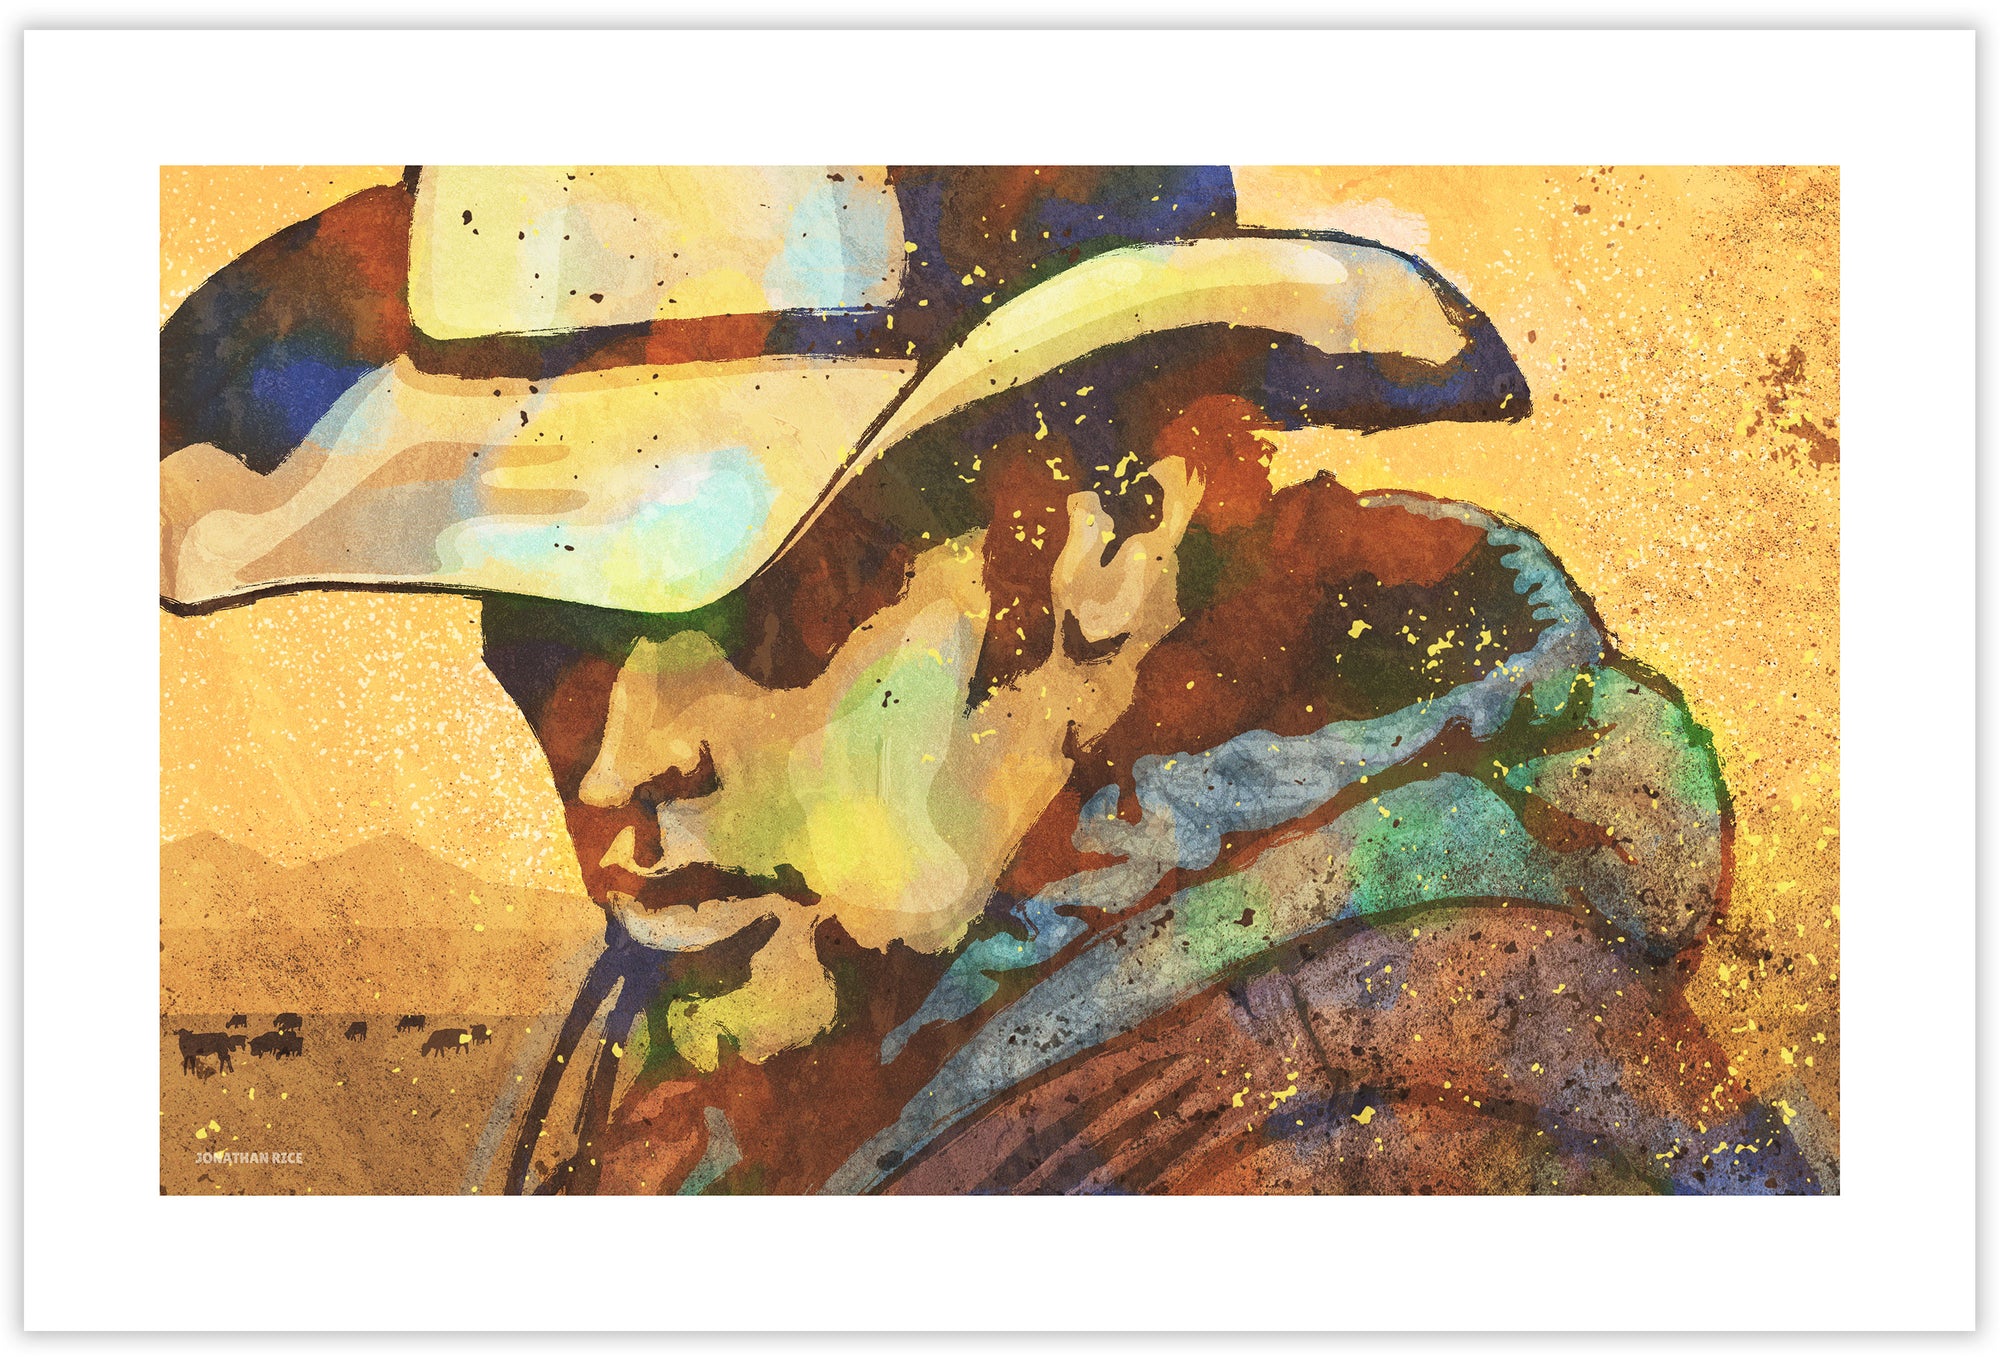 Modern style giclée art print of a melancholy marverick (cowboy) on the range. It is brightly colored, yet has gritty texture overall. There are cows and mountains in the background.